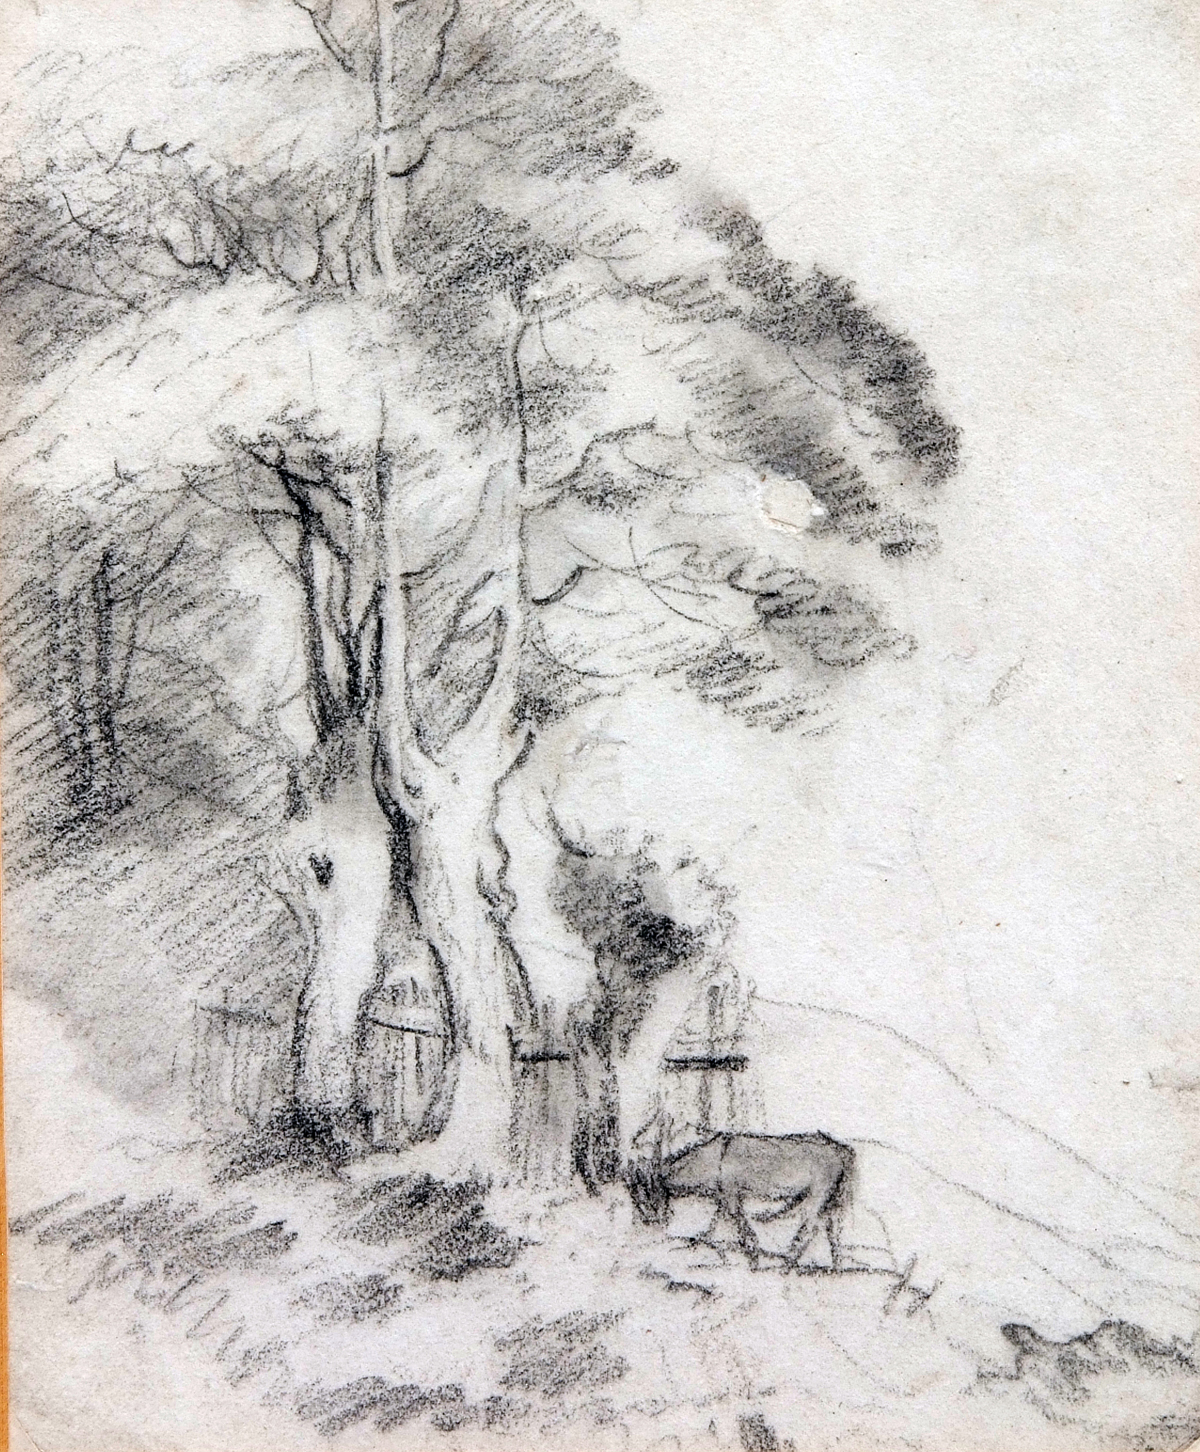 GEORGE FROST (1754-1821, BRITISH) 
Horse by a Tree
pencil drawing
8 x 6 ins
Provenance: David